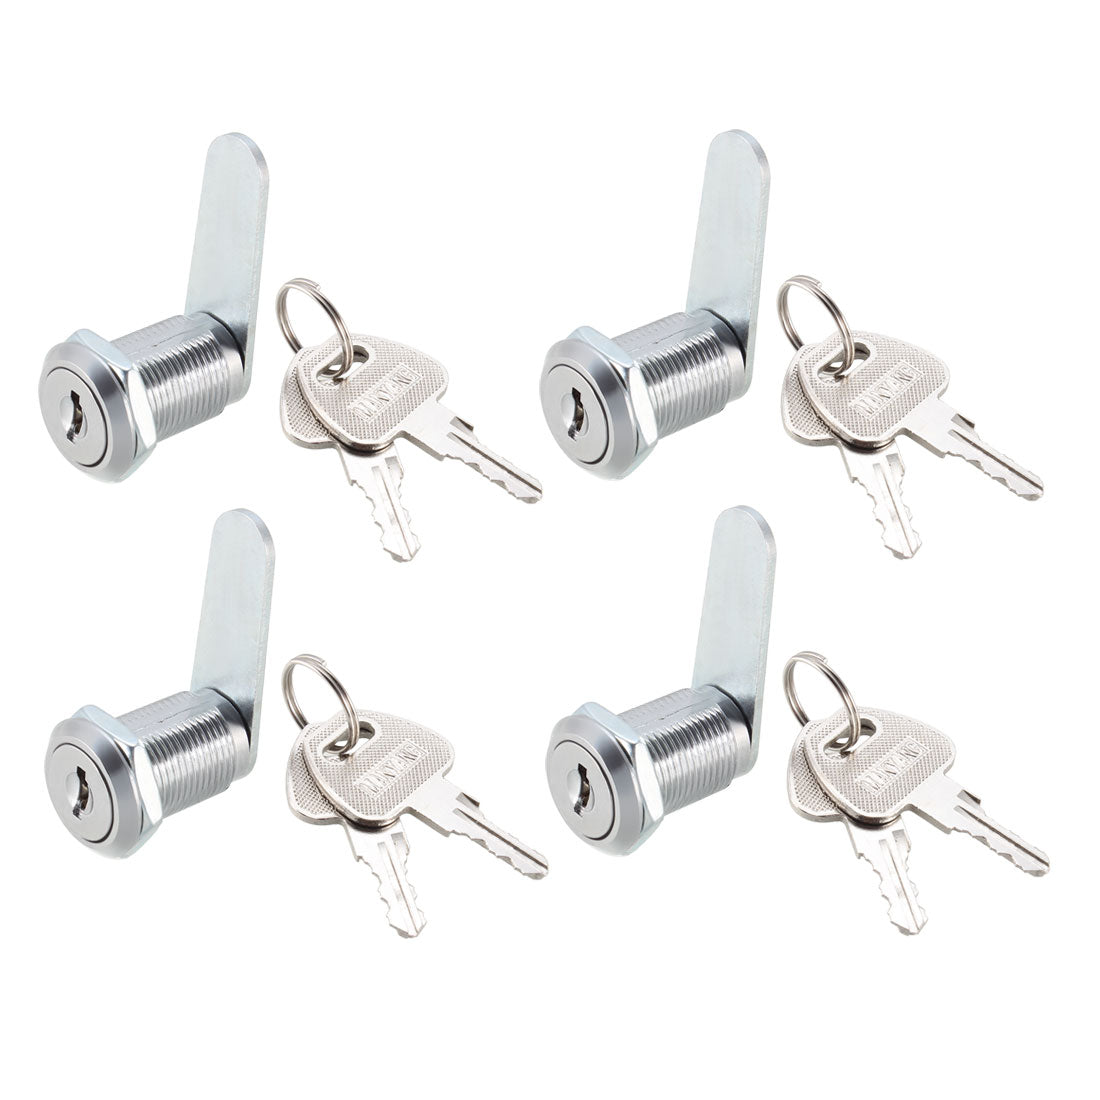 uxcell Uxcell Cam Locks 25mm Cylinder Length Fits Max 5/8-inch Thick Panel Keyed Alike 4Pcs